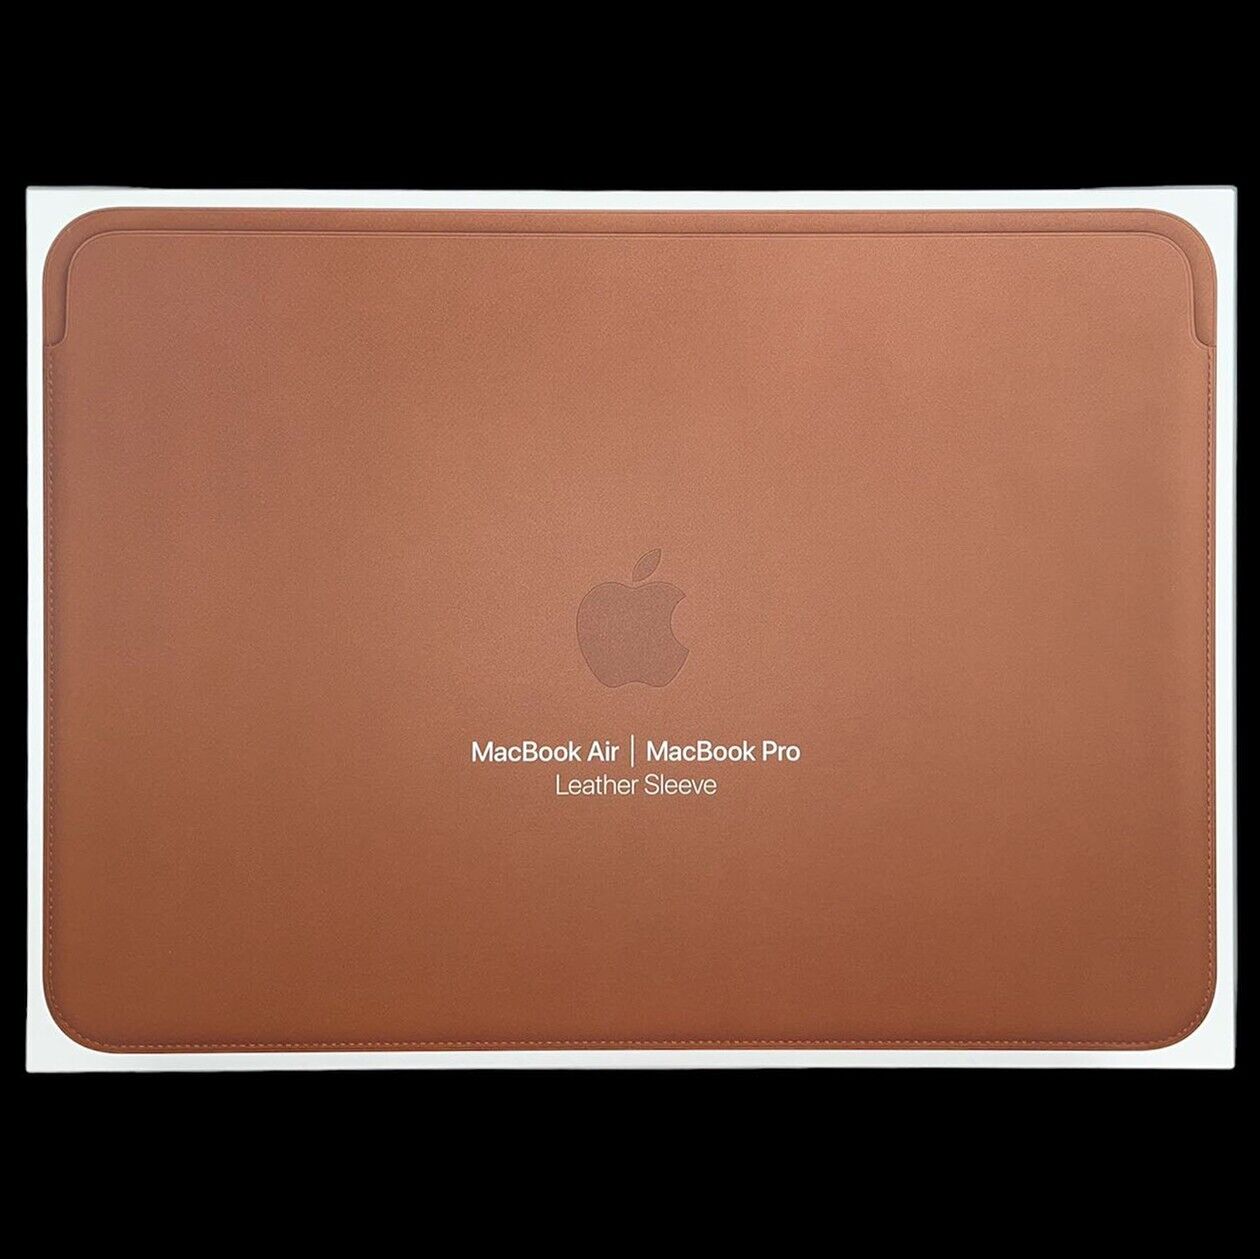 ON SALE Apple Leather Sleeve MacBook Pro 13 Air 13 Pouch Case - Saddle Brown